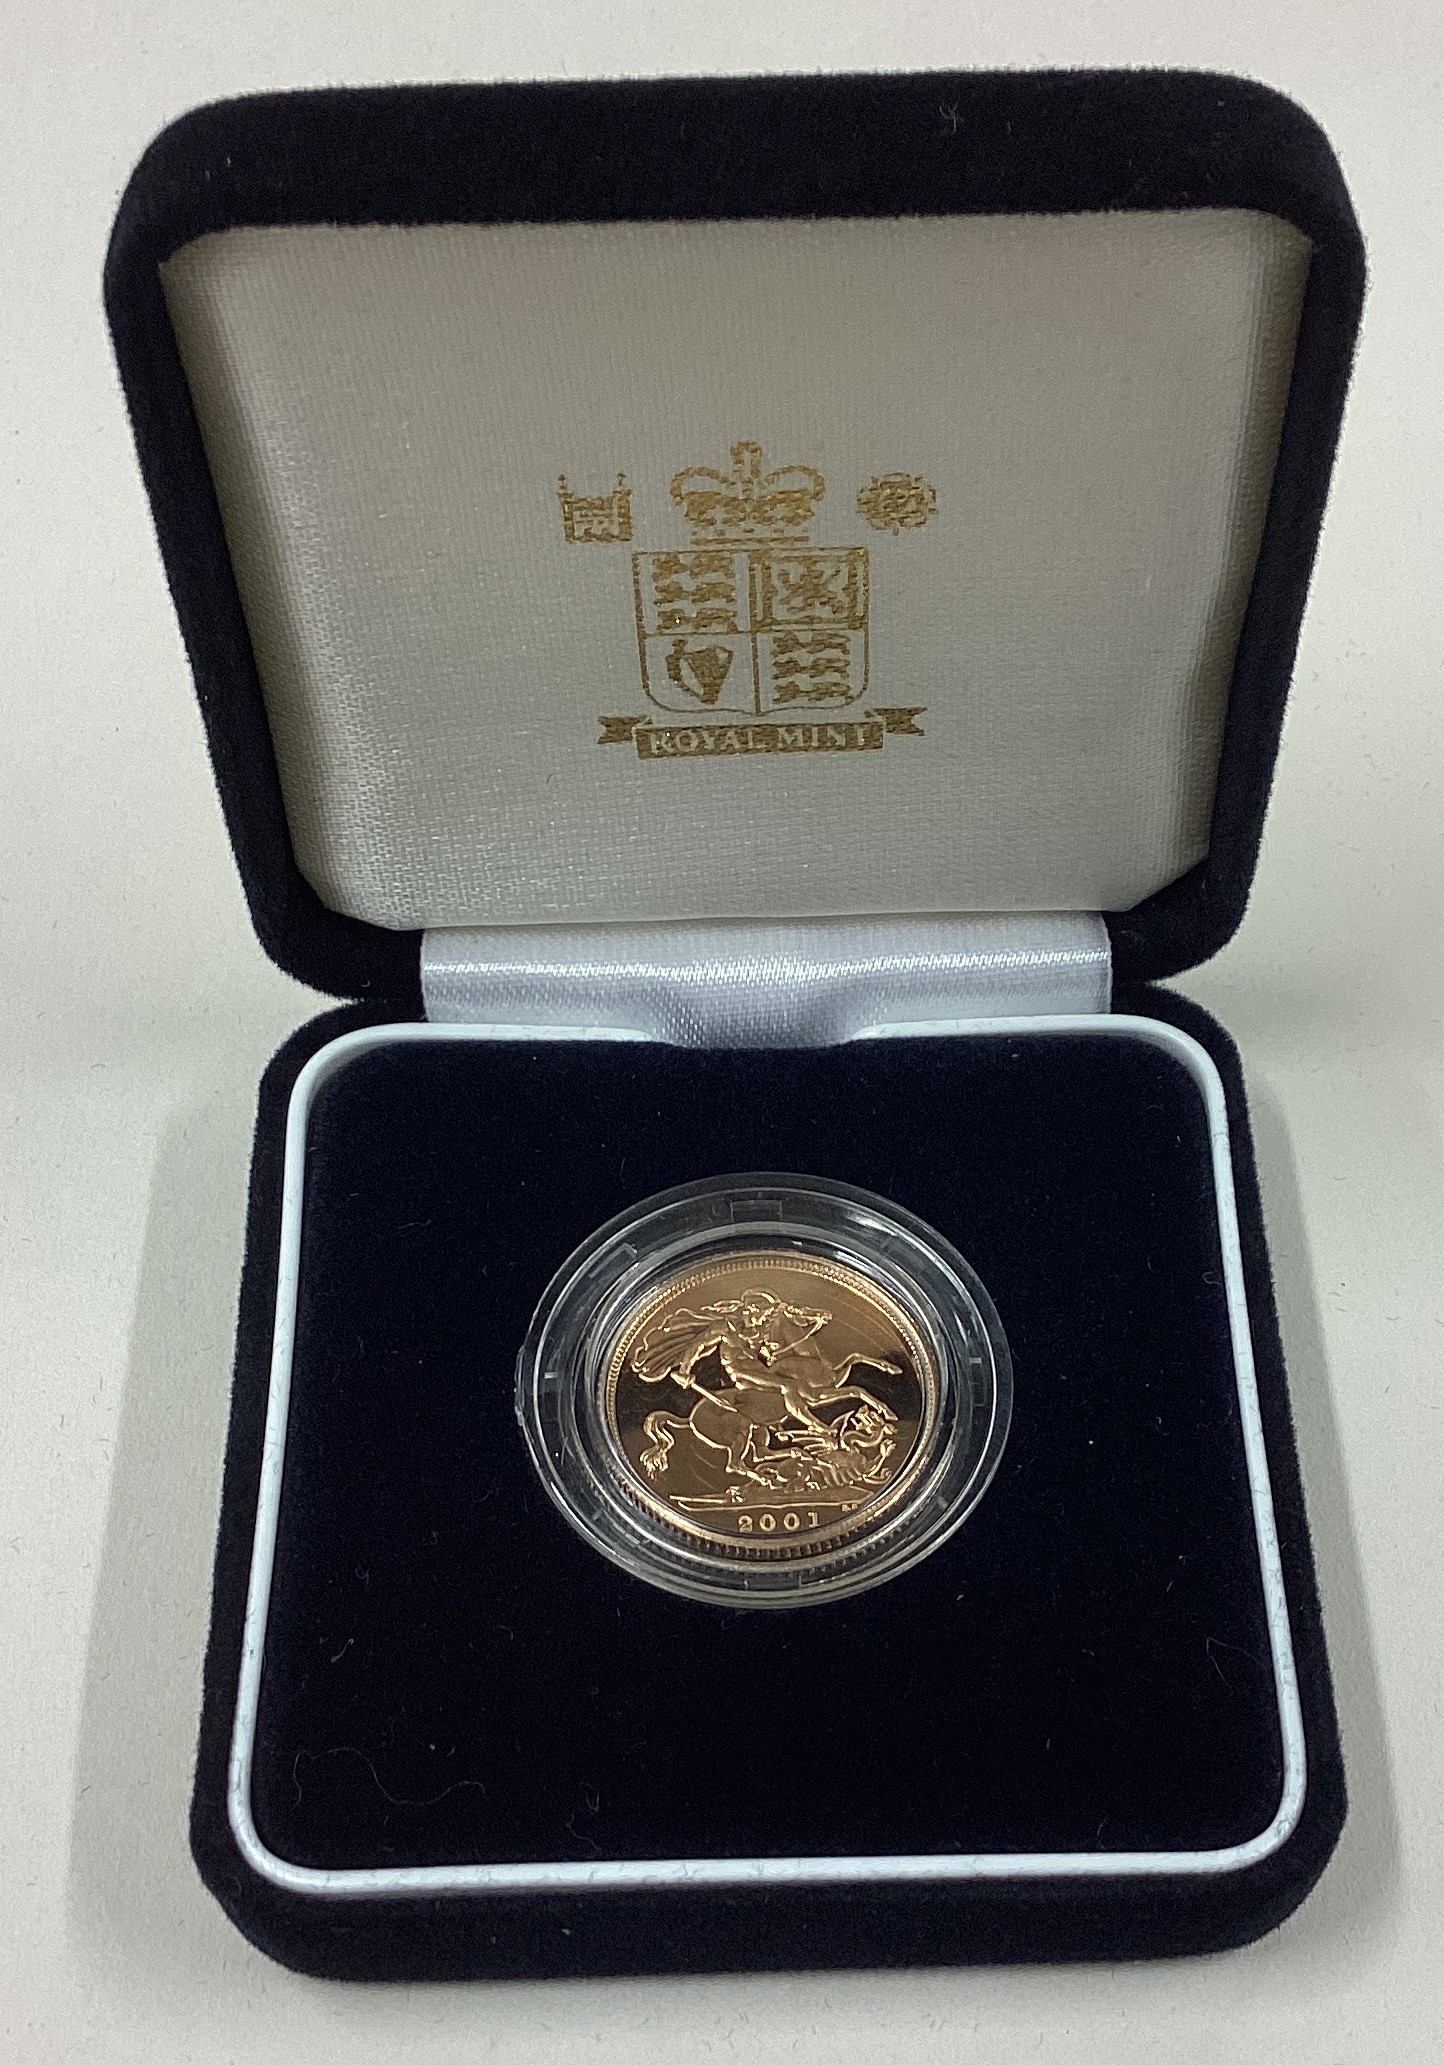 A cased 2001 gold Proof Full Sovereign coin. - Image 2 of 4